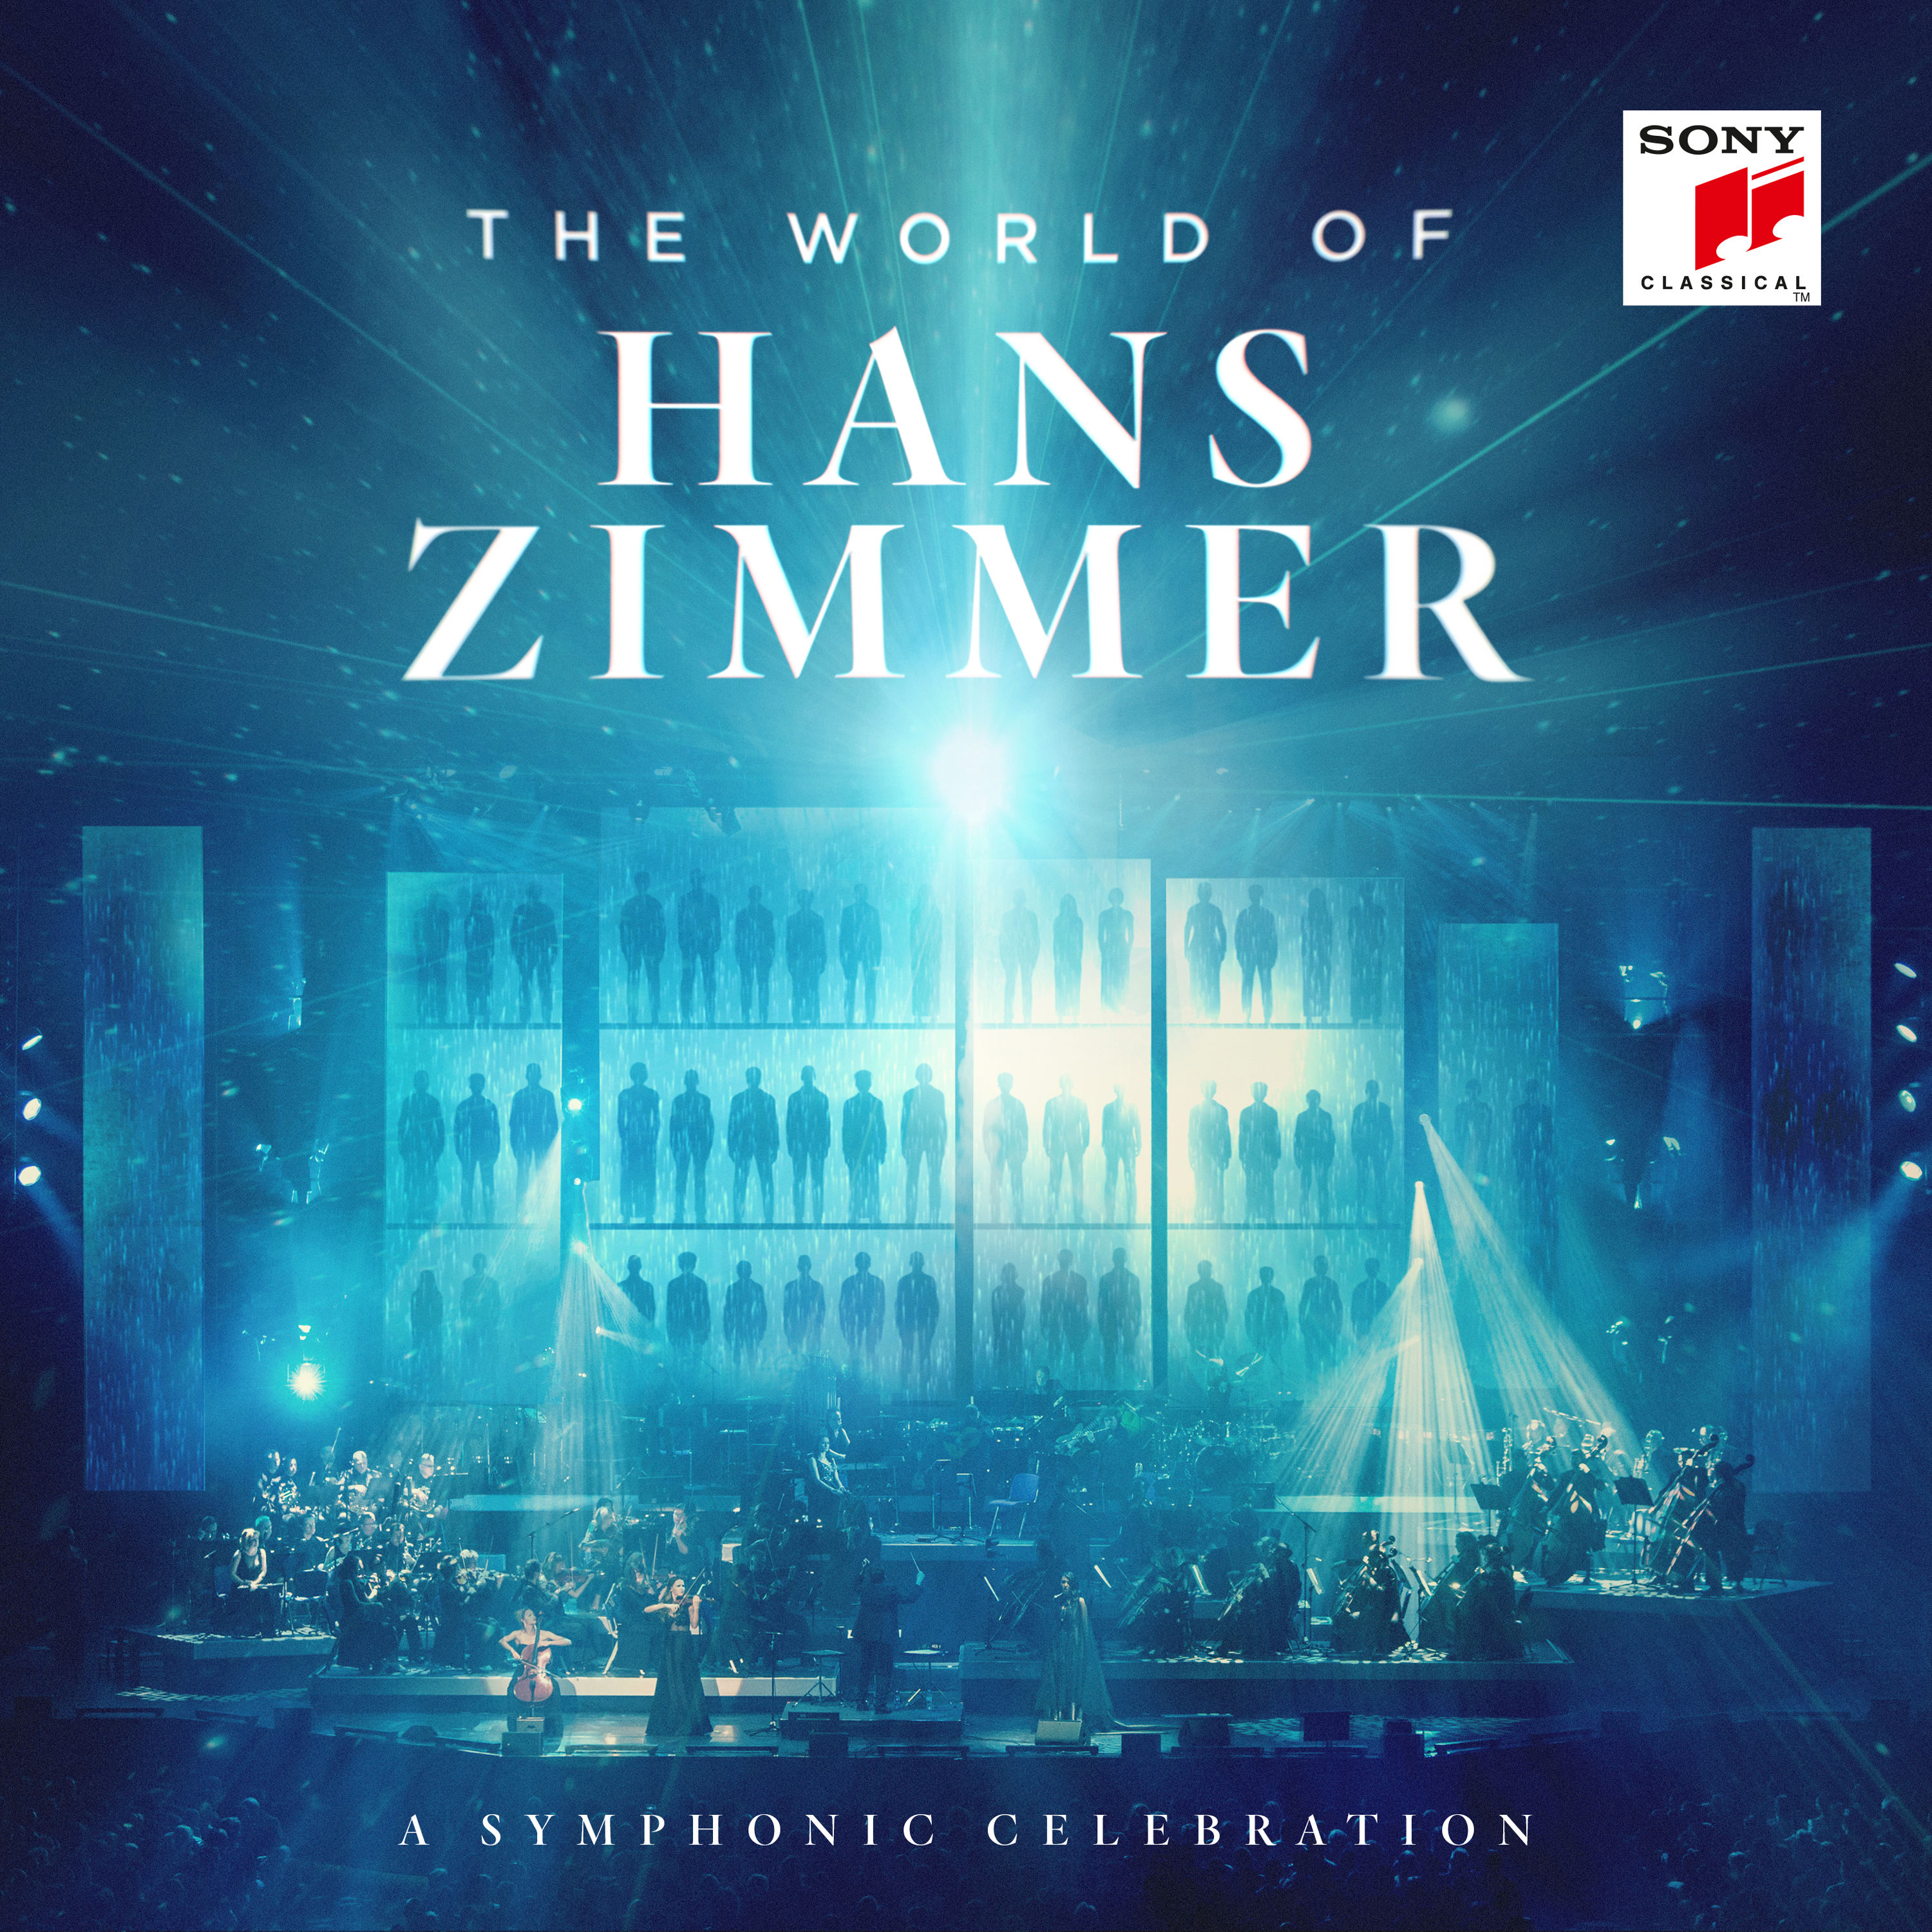 Zimmer orchestra. Hans Zimmer - the World of Hans Zimmer - a Symphonic Celebration (2019). Пластинка Hans Zimmer. Ханс Циммер виниловая пластинка. The World of Hans Zimmer Hollywood in Vienna 2018.